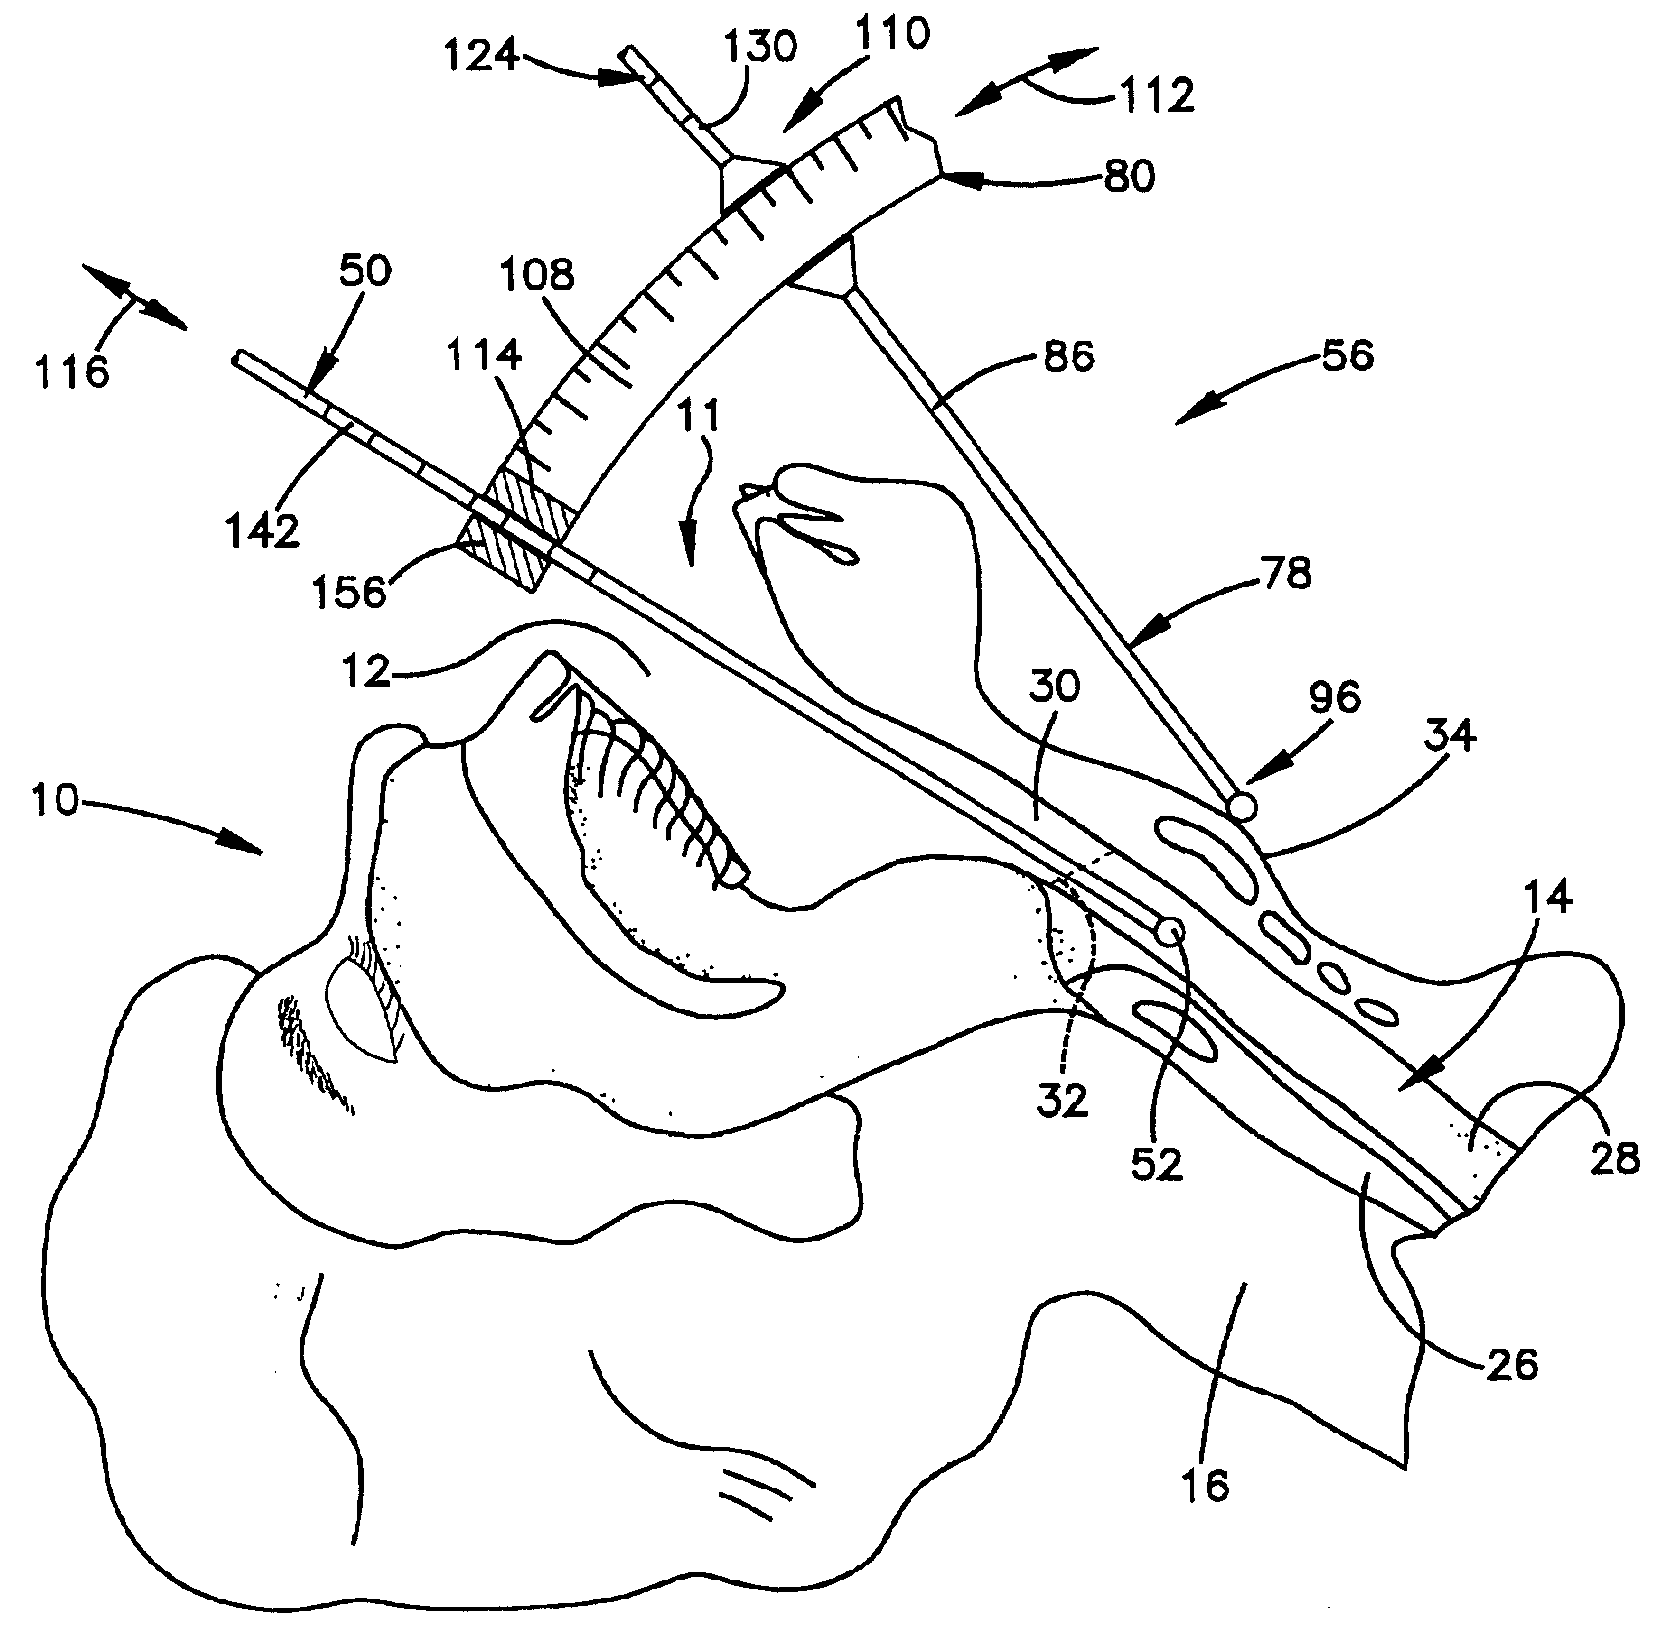 Medicant delivery system and method